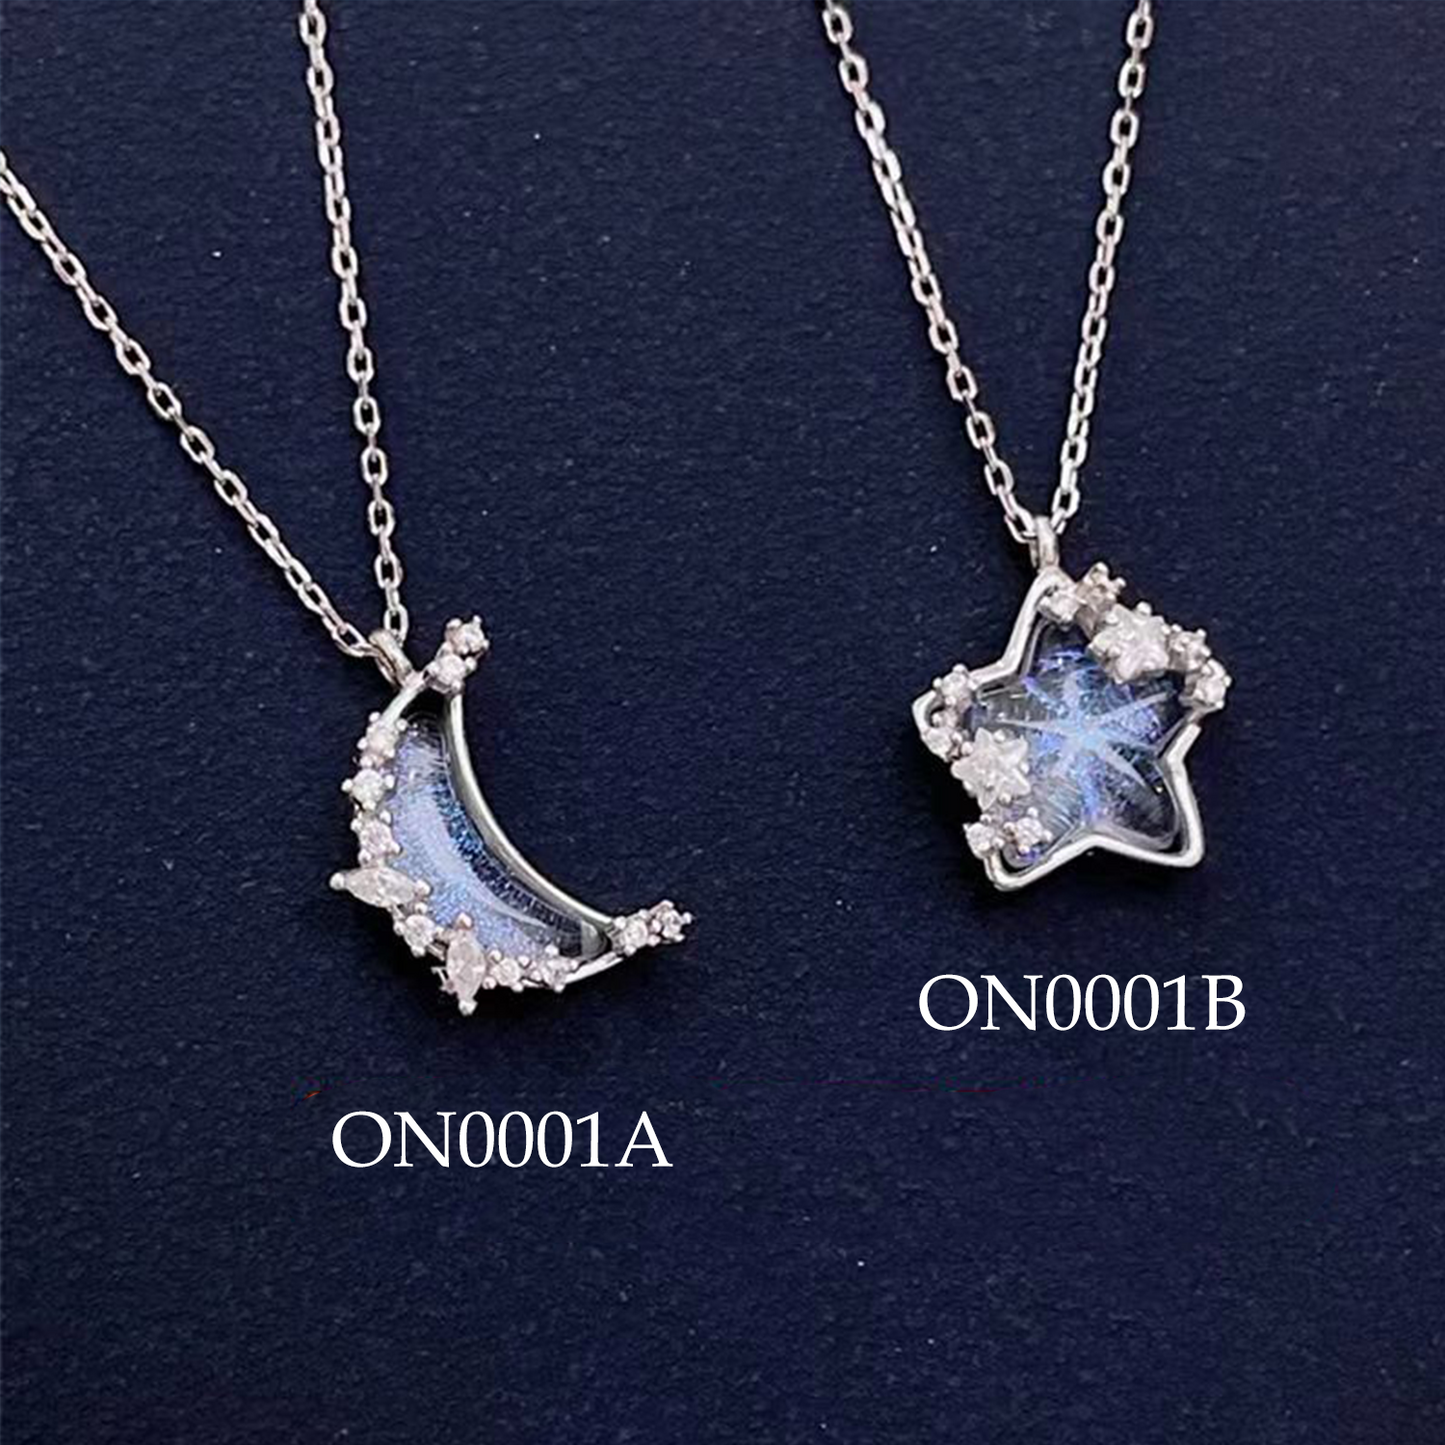 Necklace ON0001